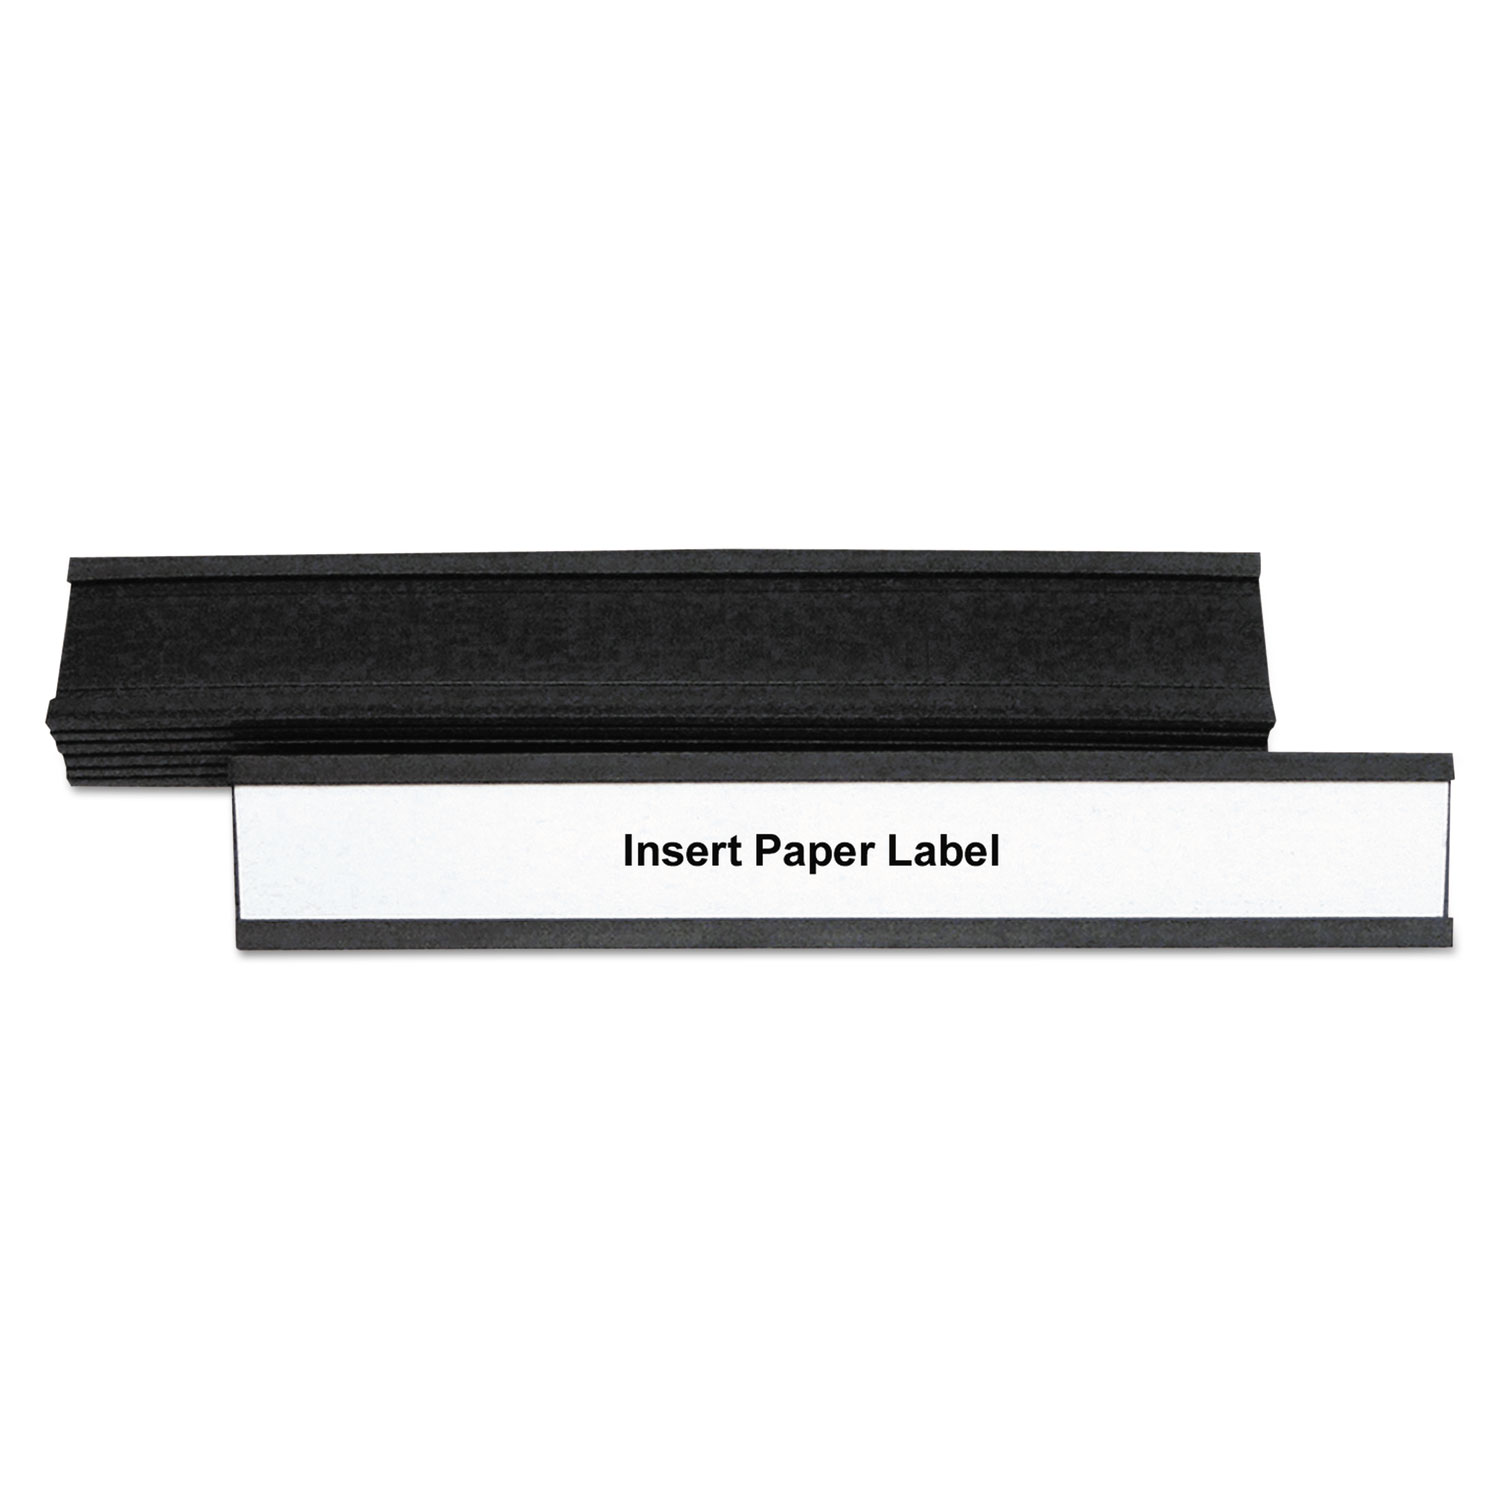  MasterVision FM2632 Magnetic Card Holders, 6w x 1h, Black, 10/Pack (BVCFM2632) 